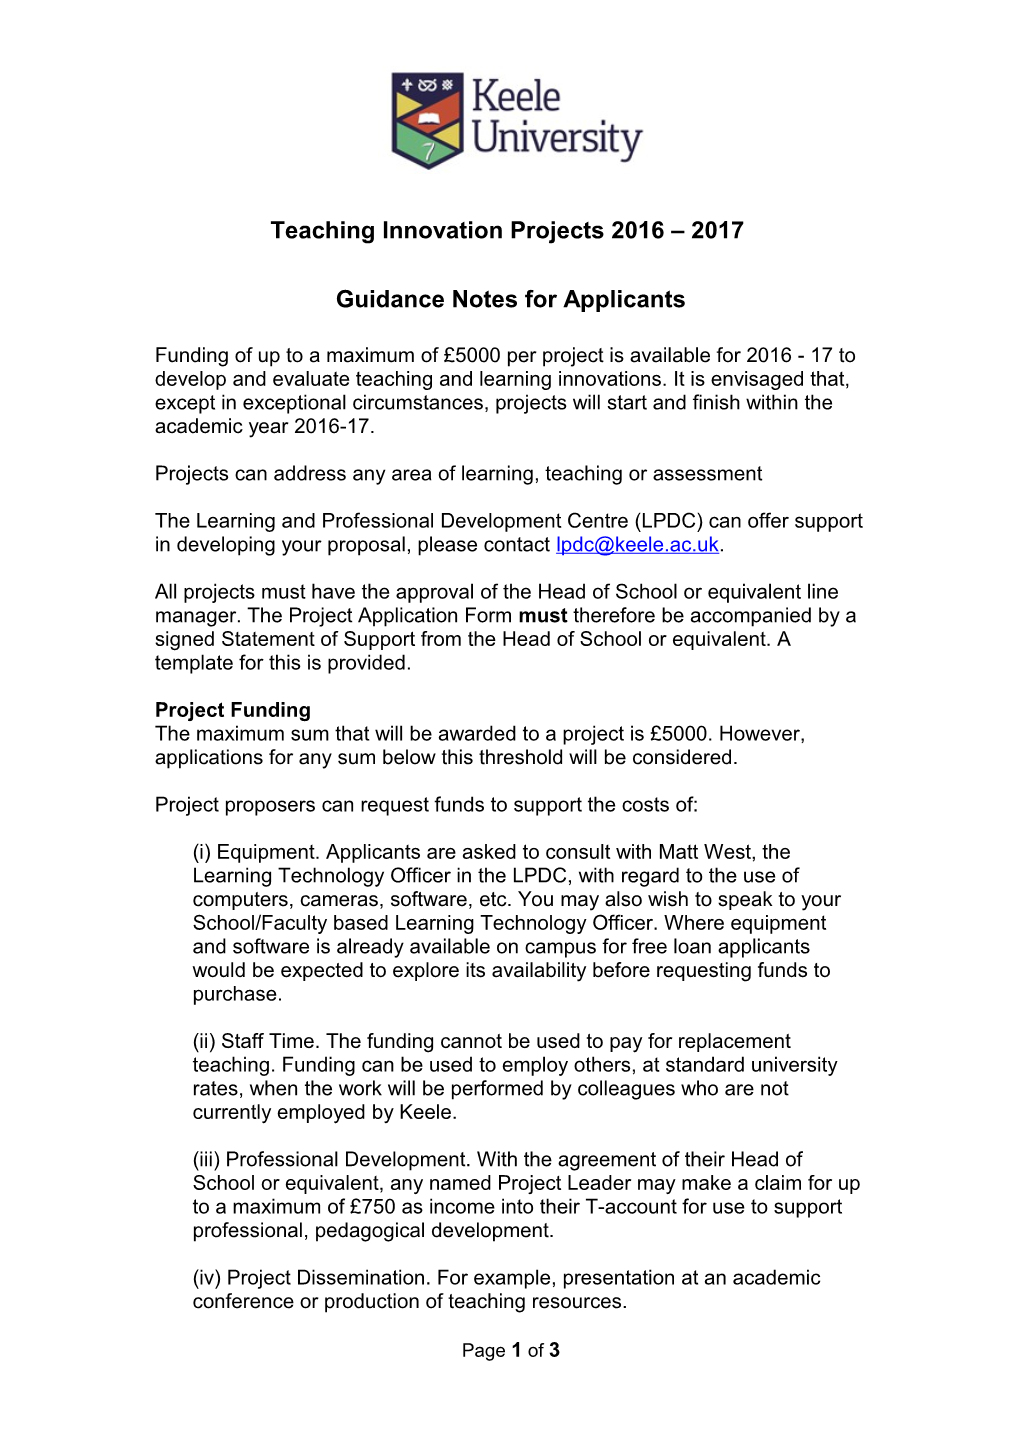 Keele University Call for Teaching Innovation Projects for 2010 - 2011